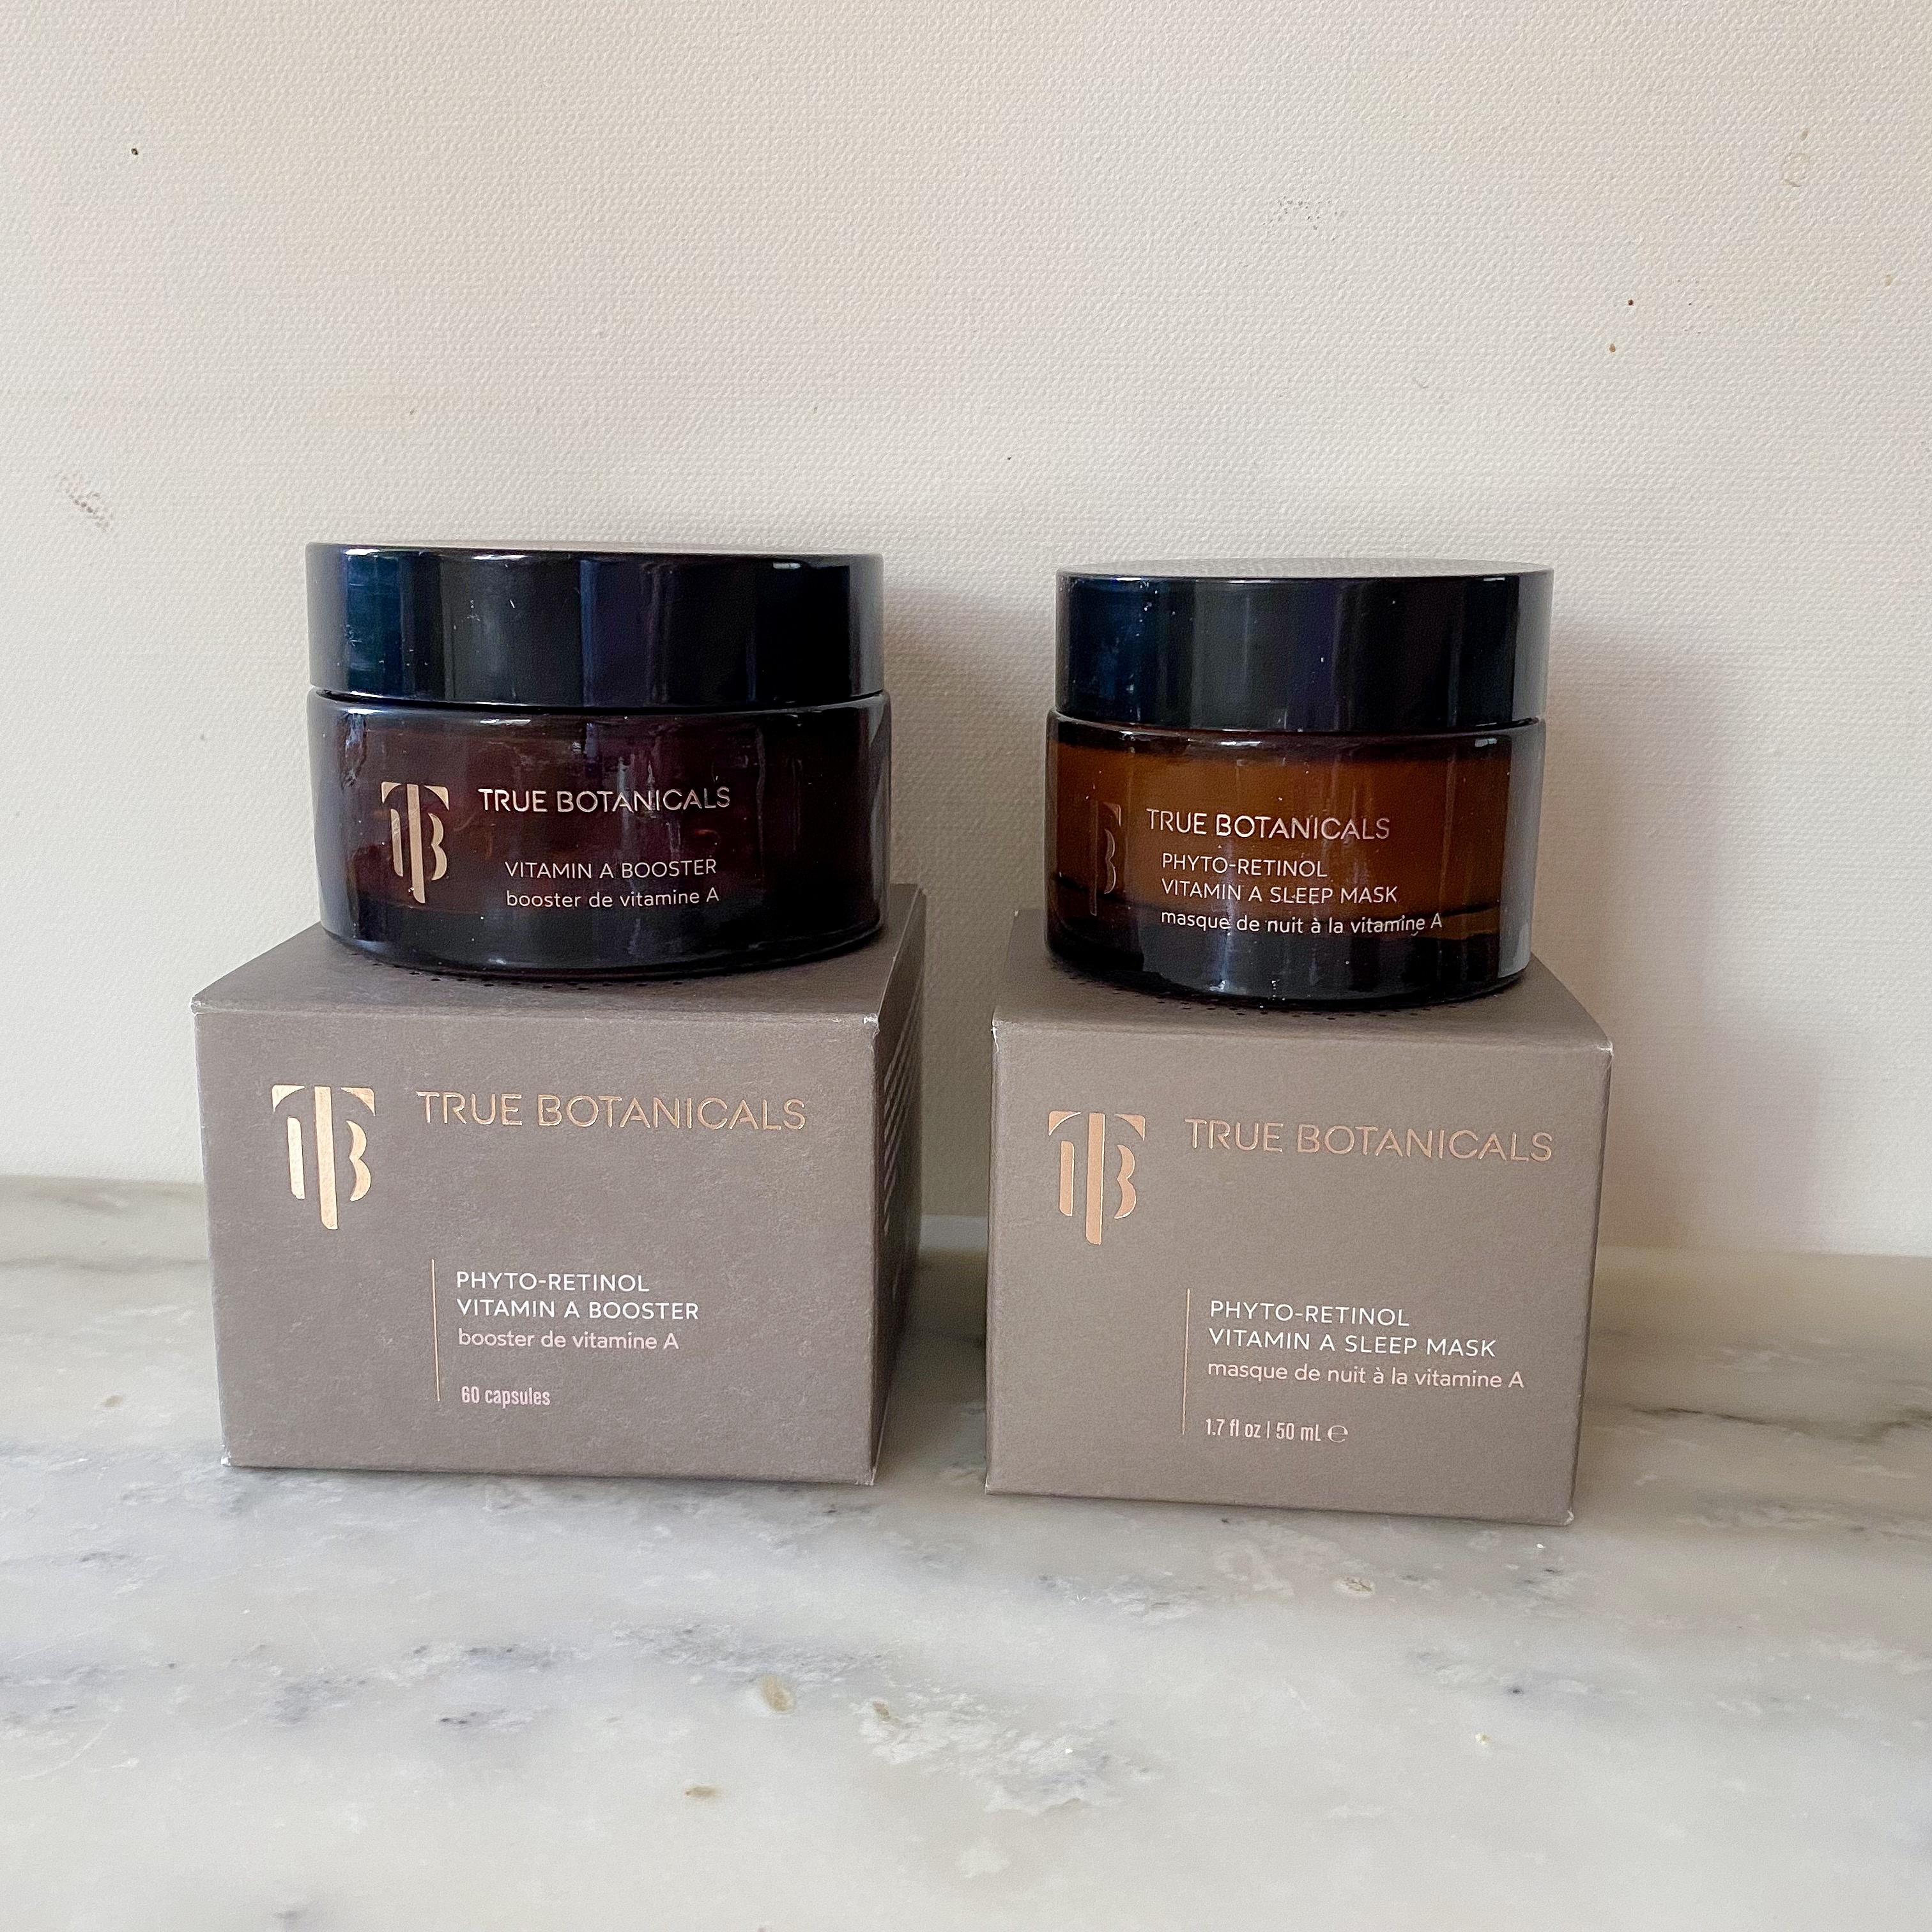 Beauty Heroes Beauty Discovery November 2022 Review + Coupon